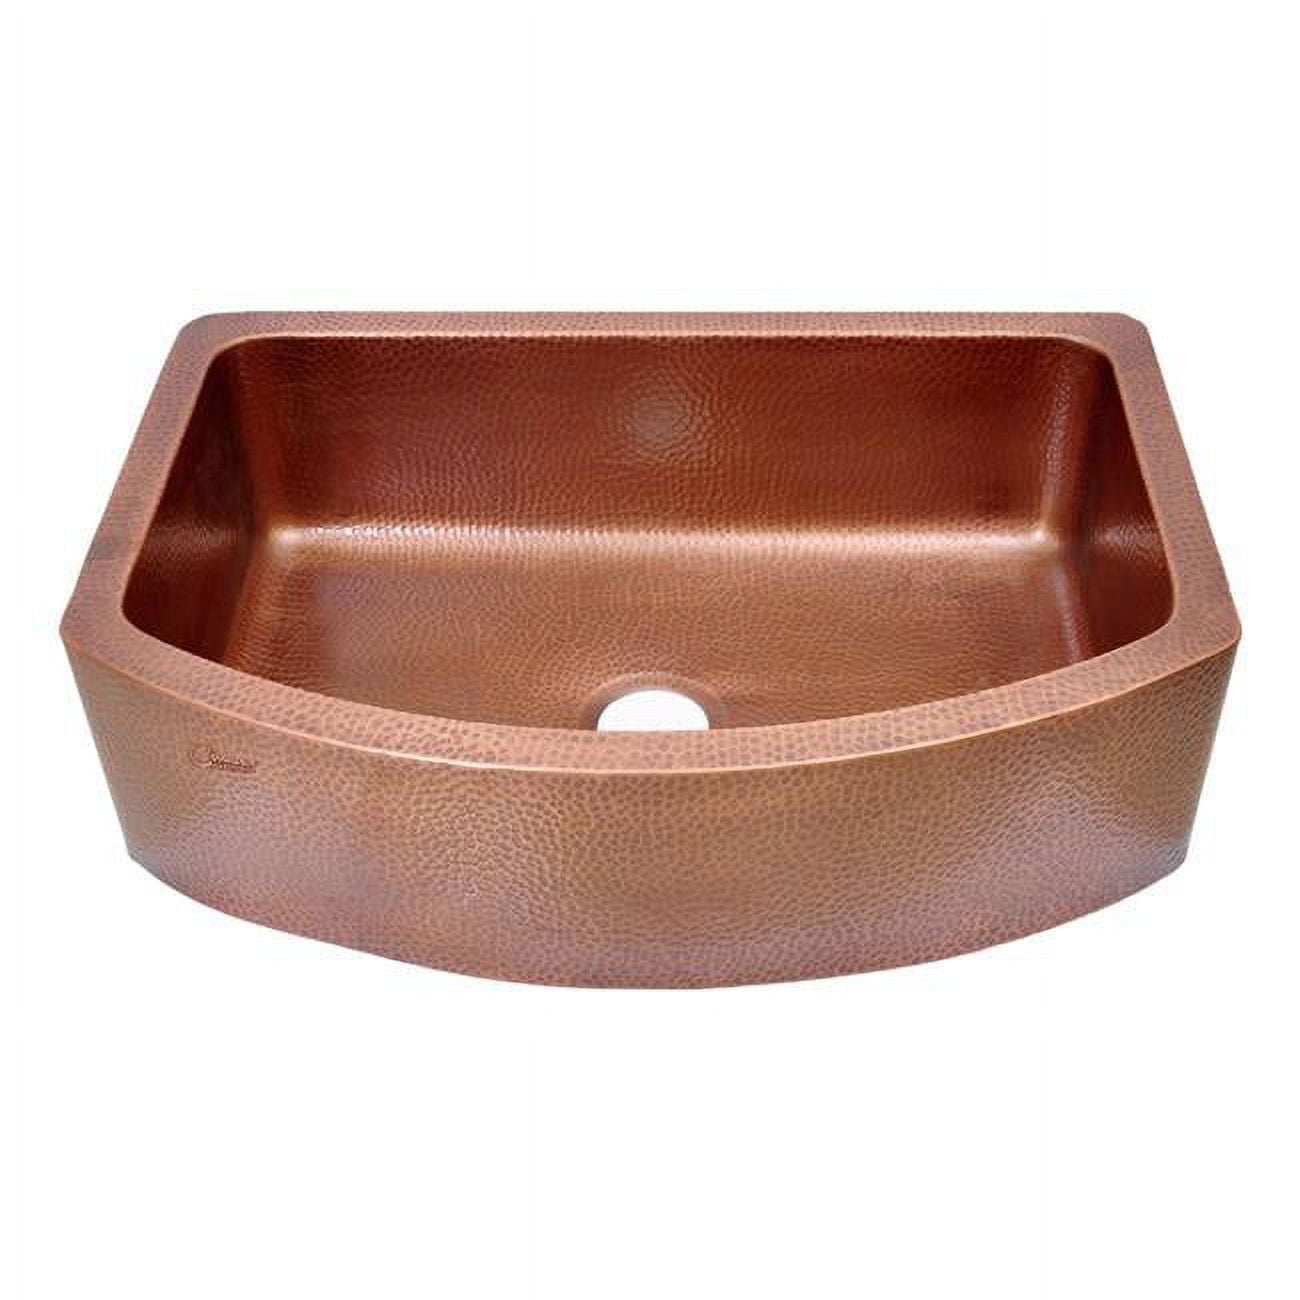 CKSDShHFAA33.22.9 Single Bowl Front Apron Hammered Antiique D-Shape Antique Copper Kitchen Sink -  Coppersmith Creations